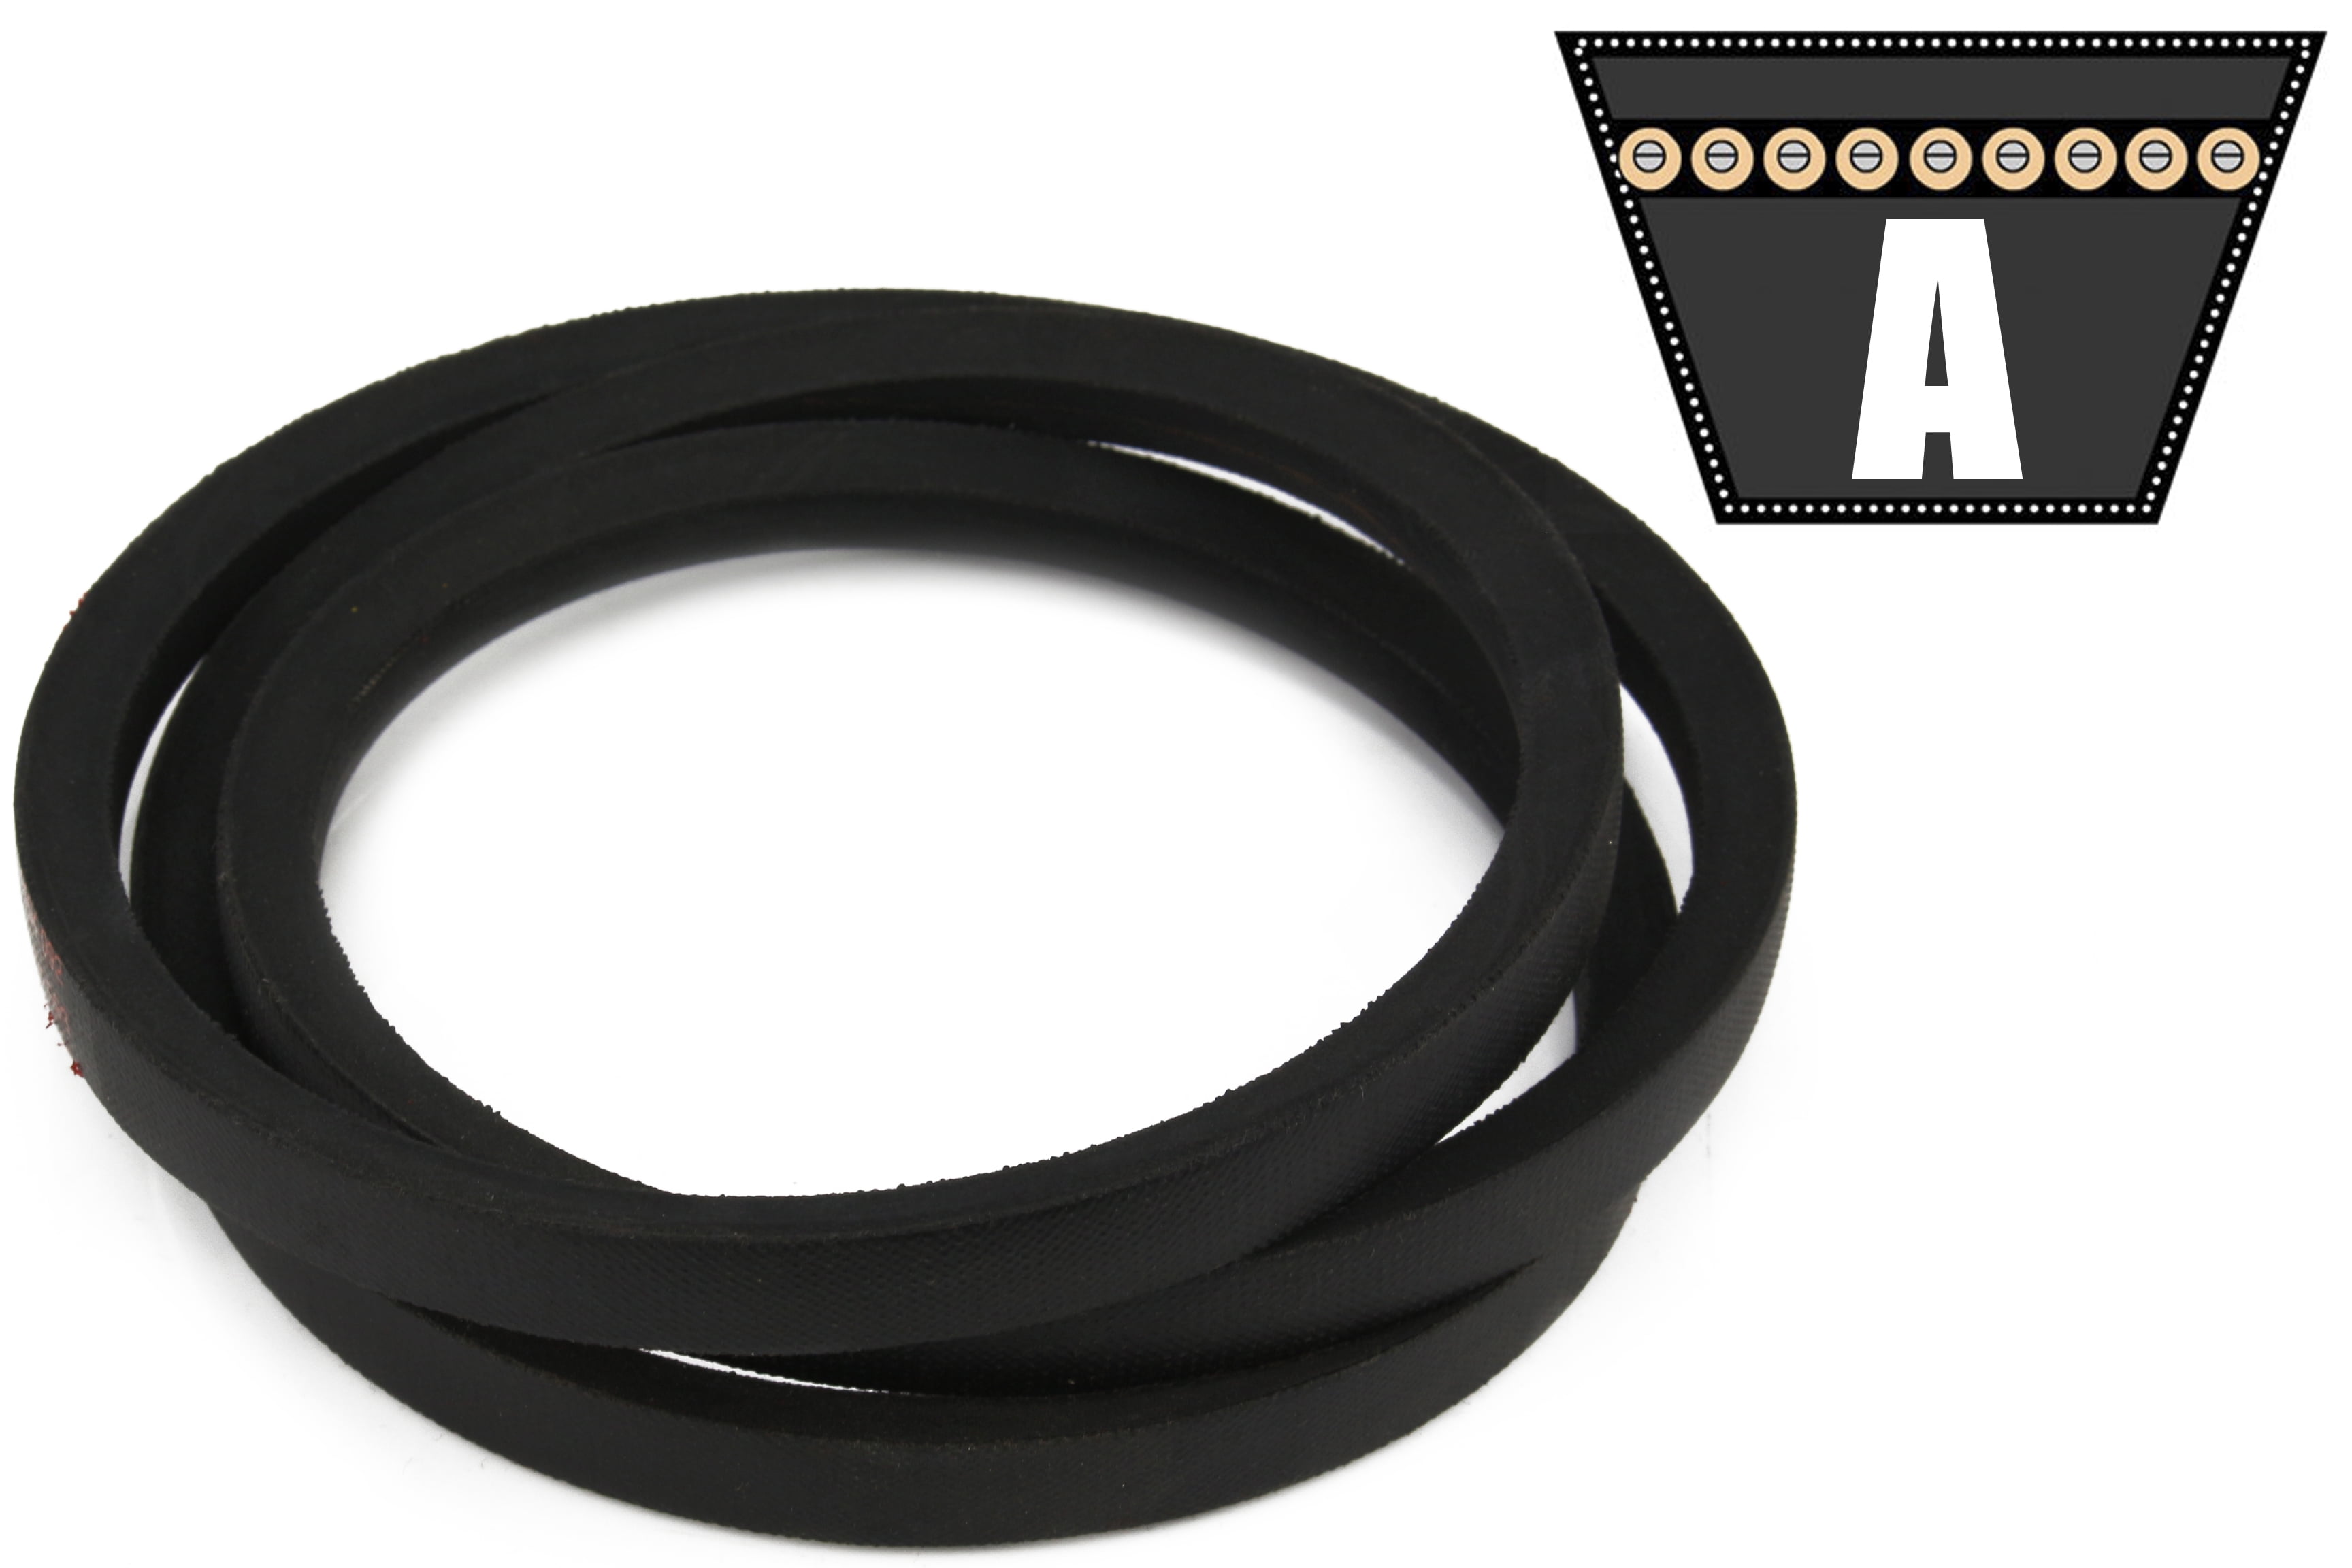 4L440 BELT A42 FOR ADC 100171 